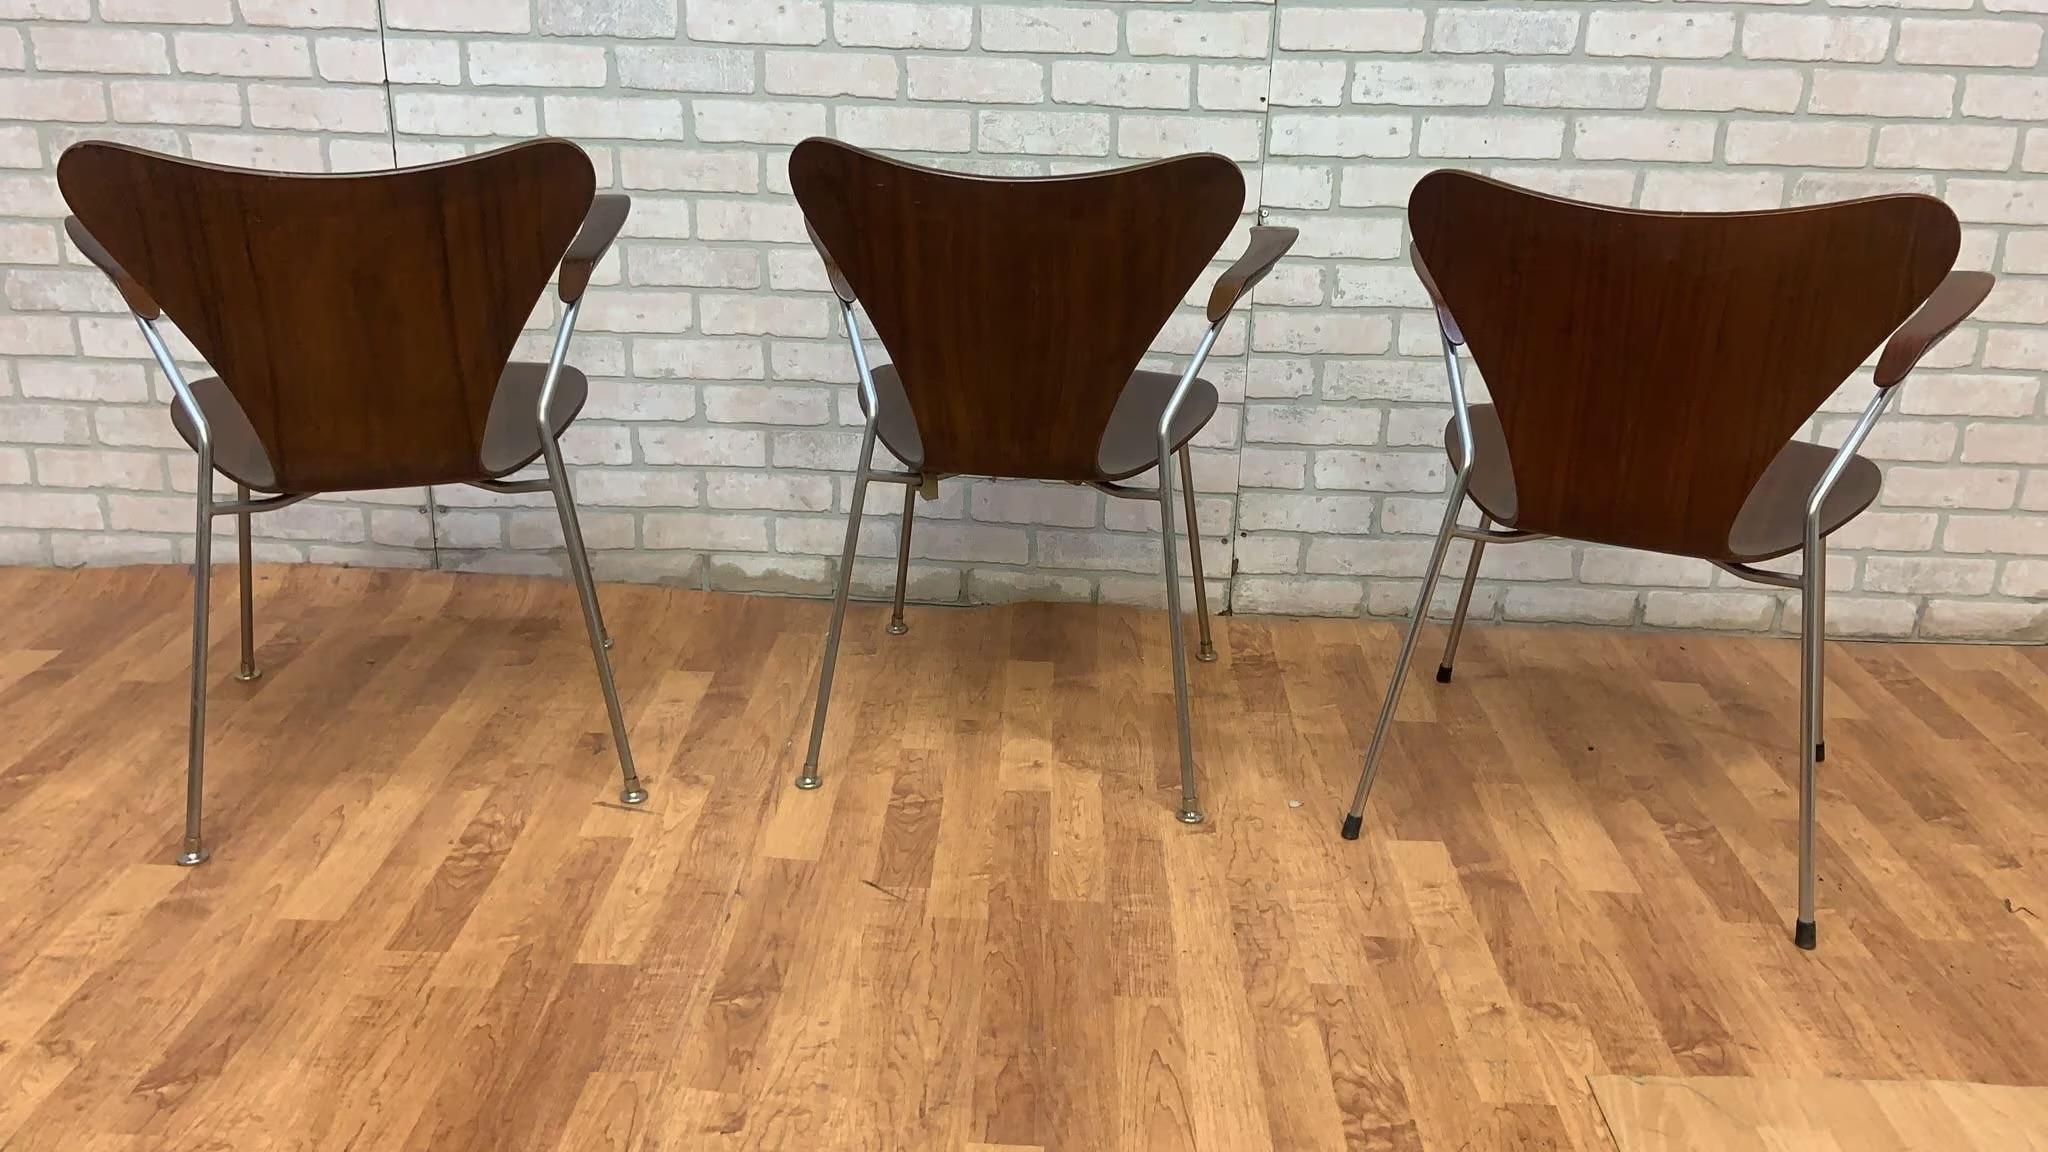 Mid-20th Century Series 7 Butterfly Teak Armchairs by Arne Jacobsen for Fritz Hansen - Set of 3 For Sale